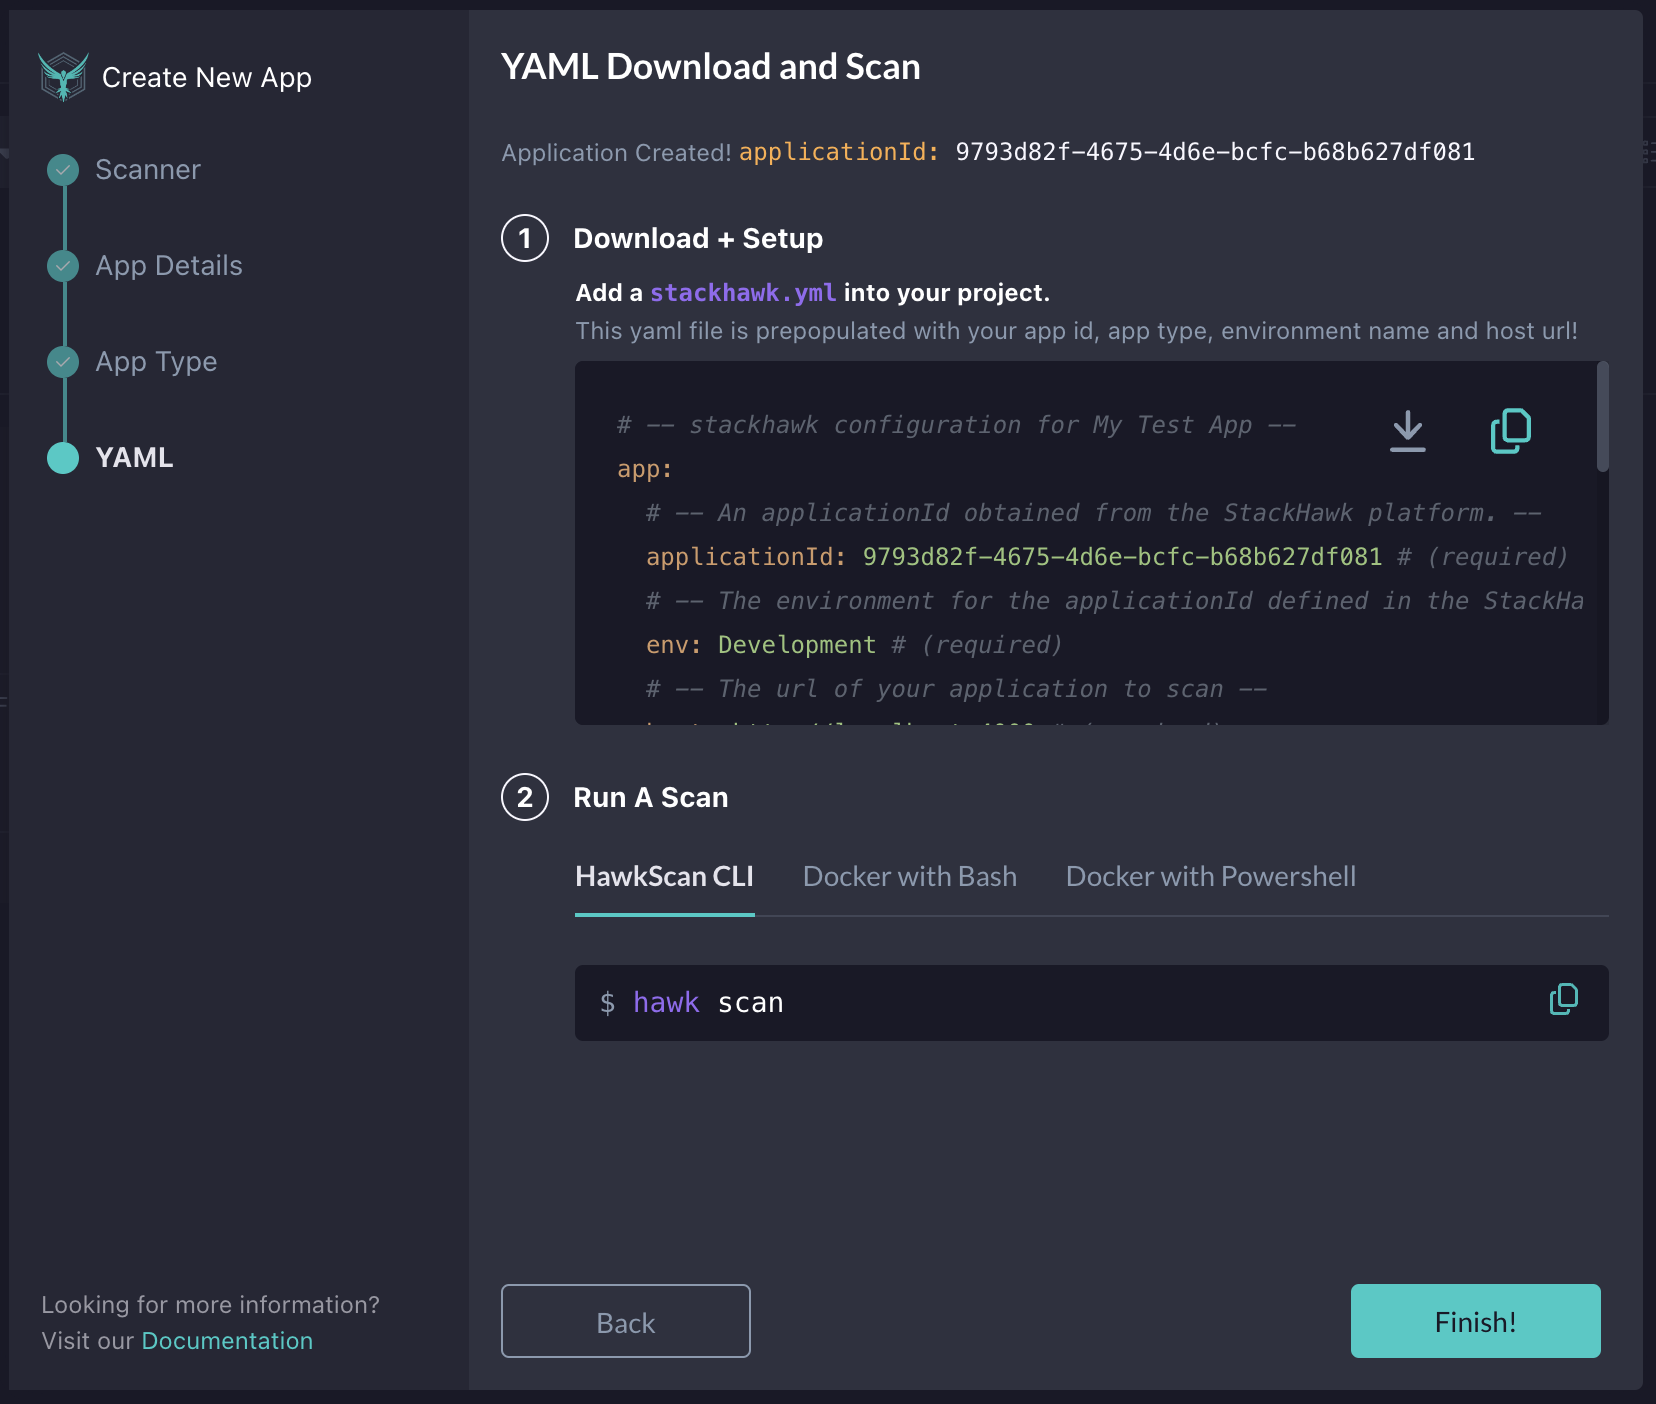 StackHawk app creation wizard - YAML Download and Scan image